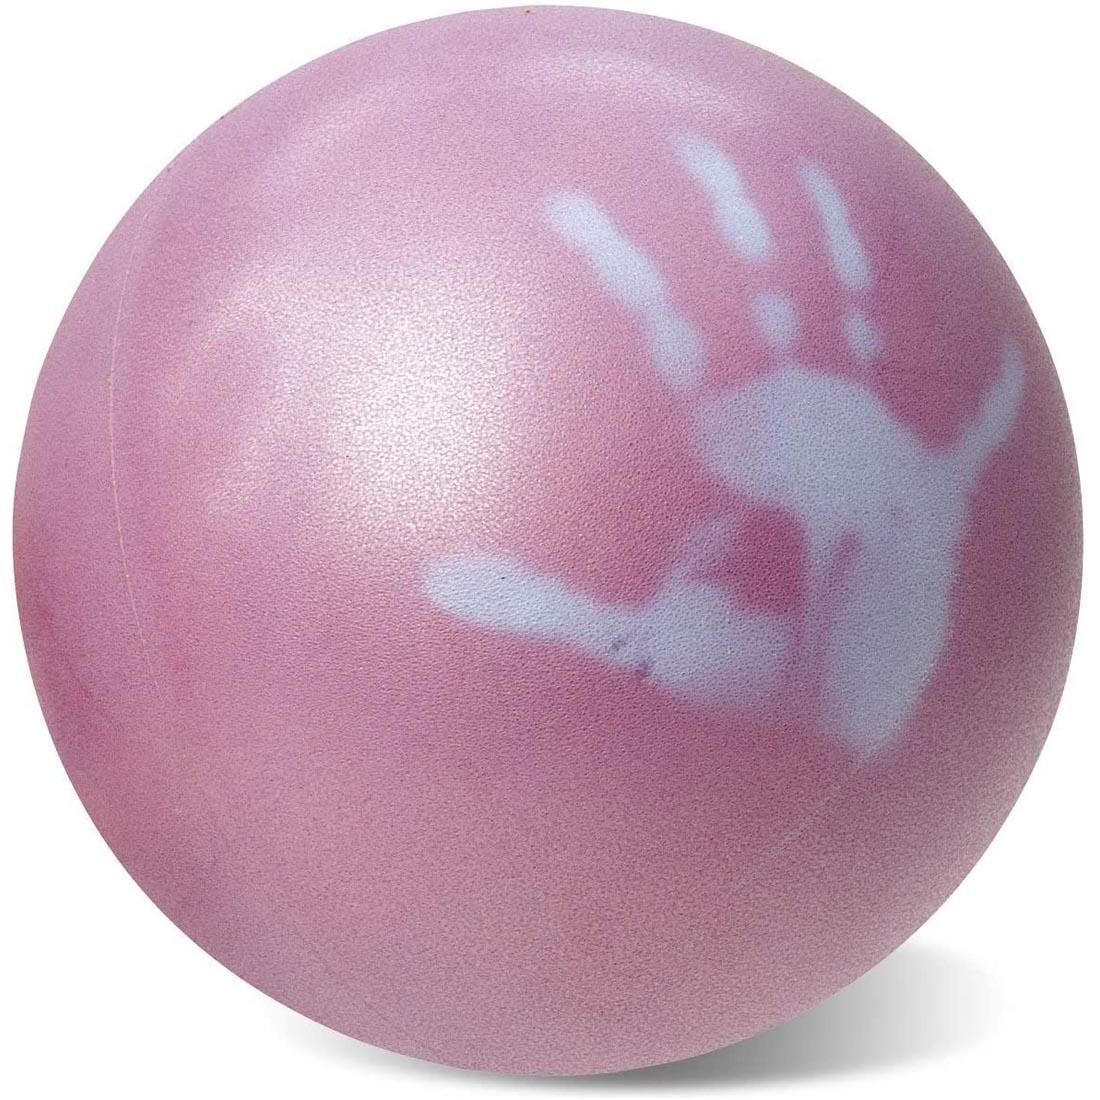 Magic Gertie Ball with a color-changed handprint on it